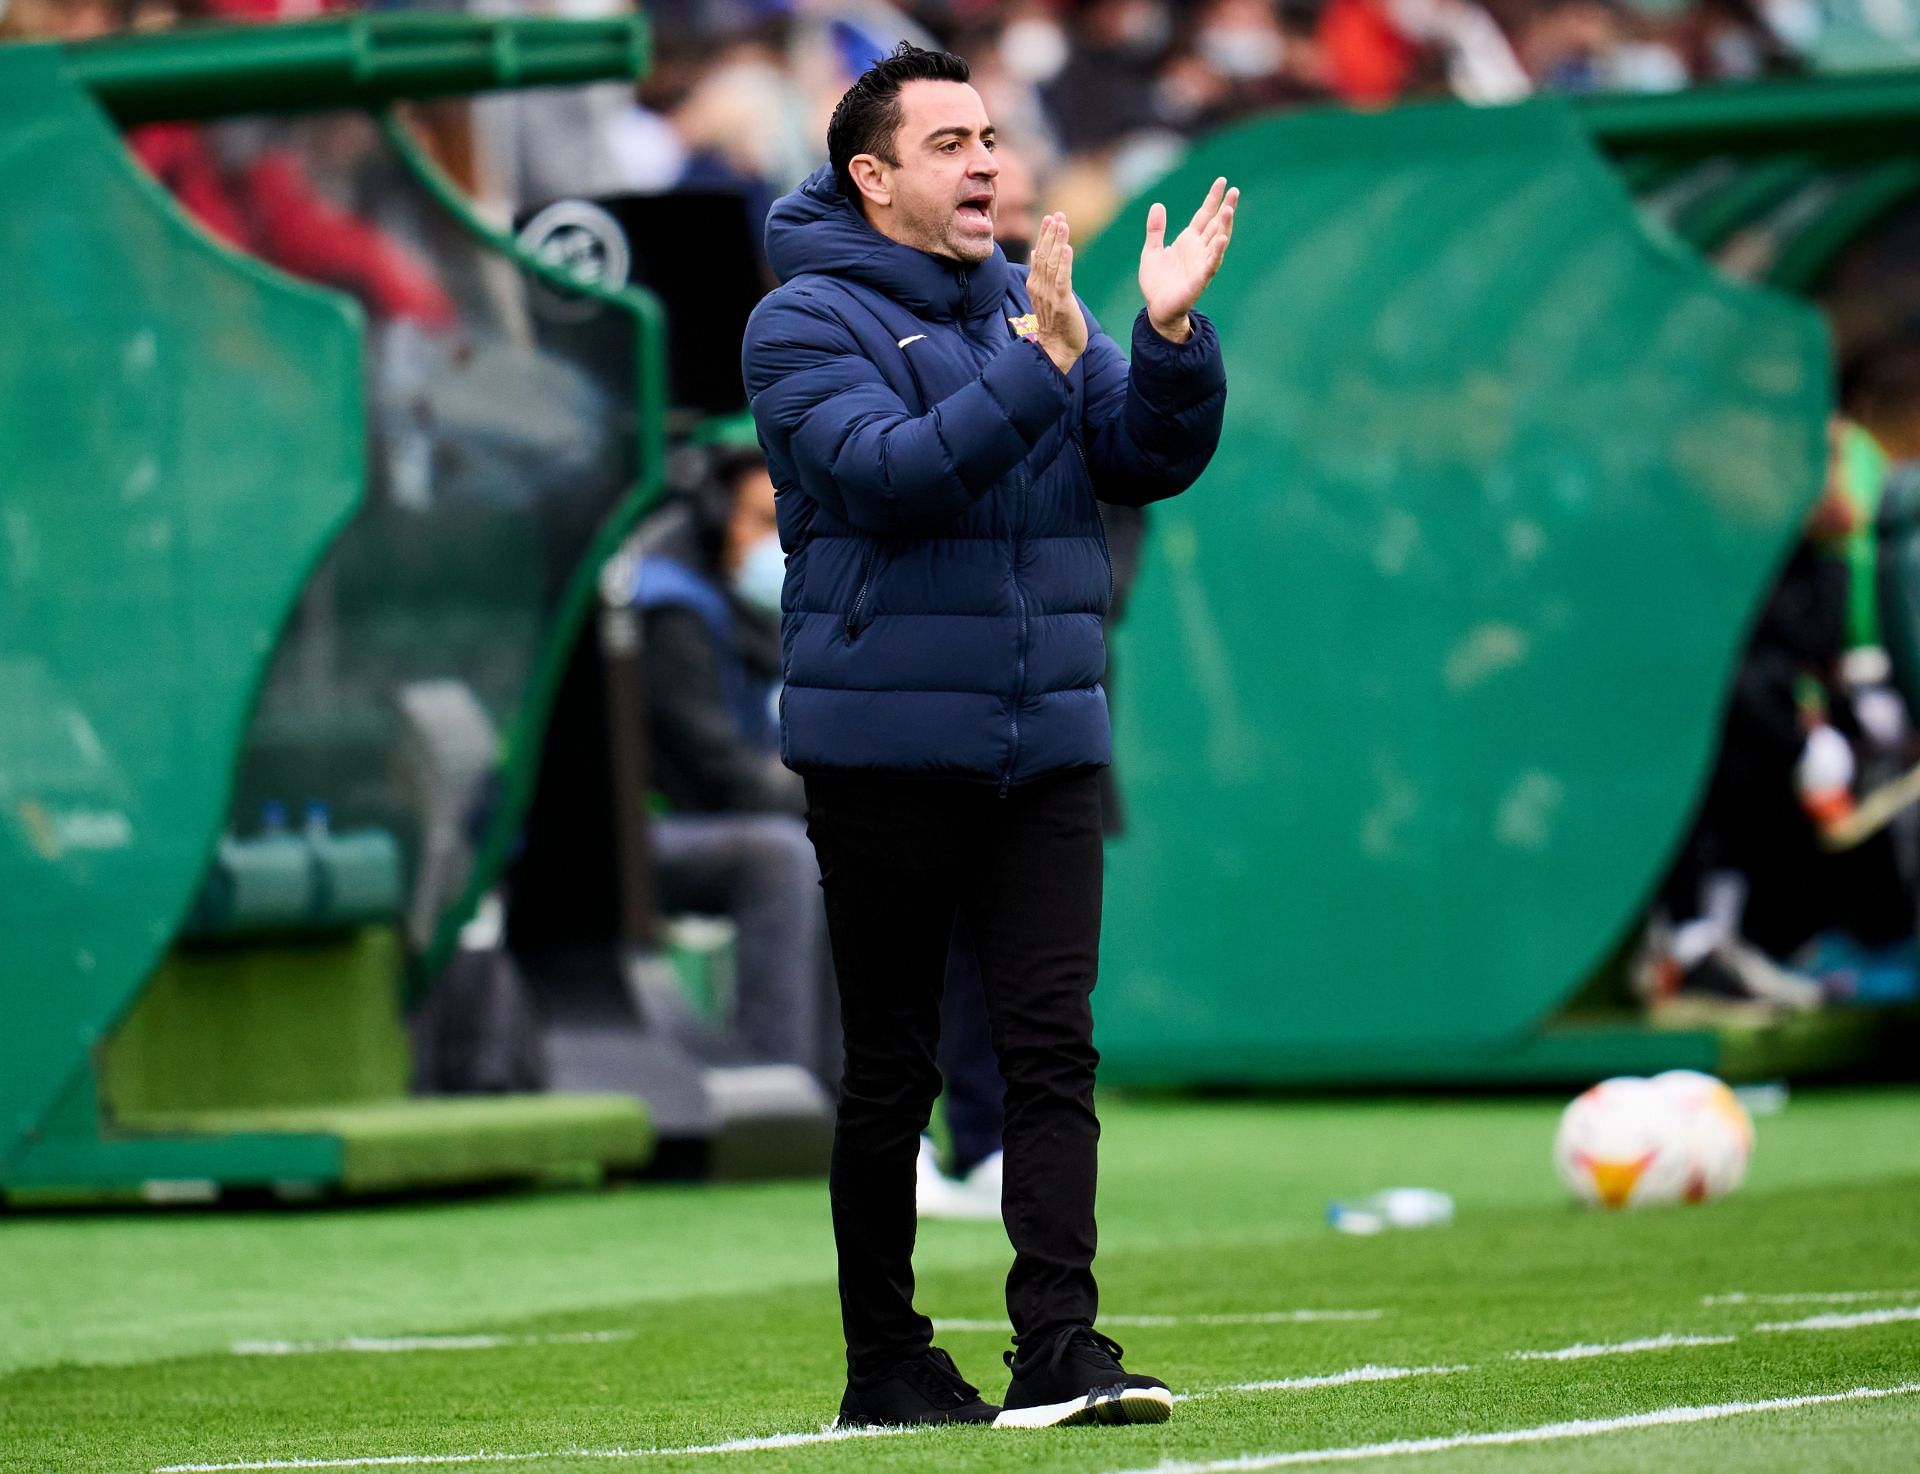 Barcelona Transfer News Roundup: Xavi wants to bring La Masia graduate back to the club, Juventus want to sign Barca transfer target and more – 11 March 2022